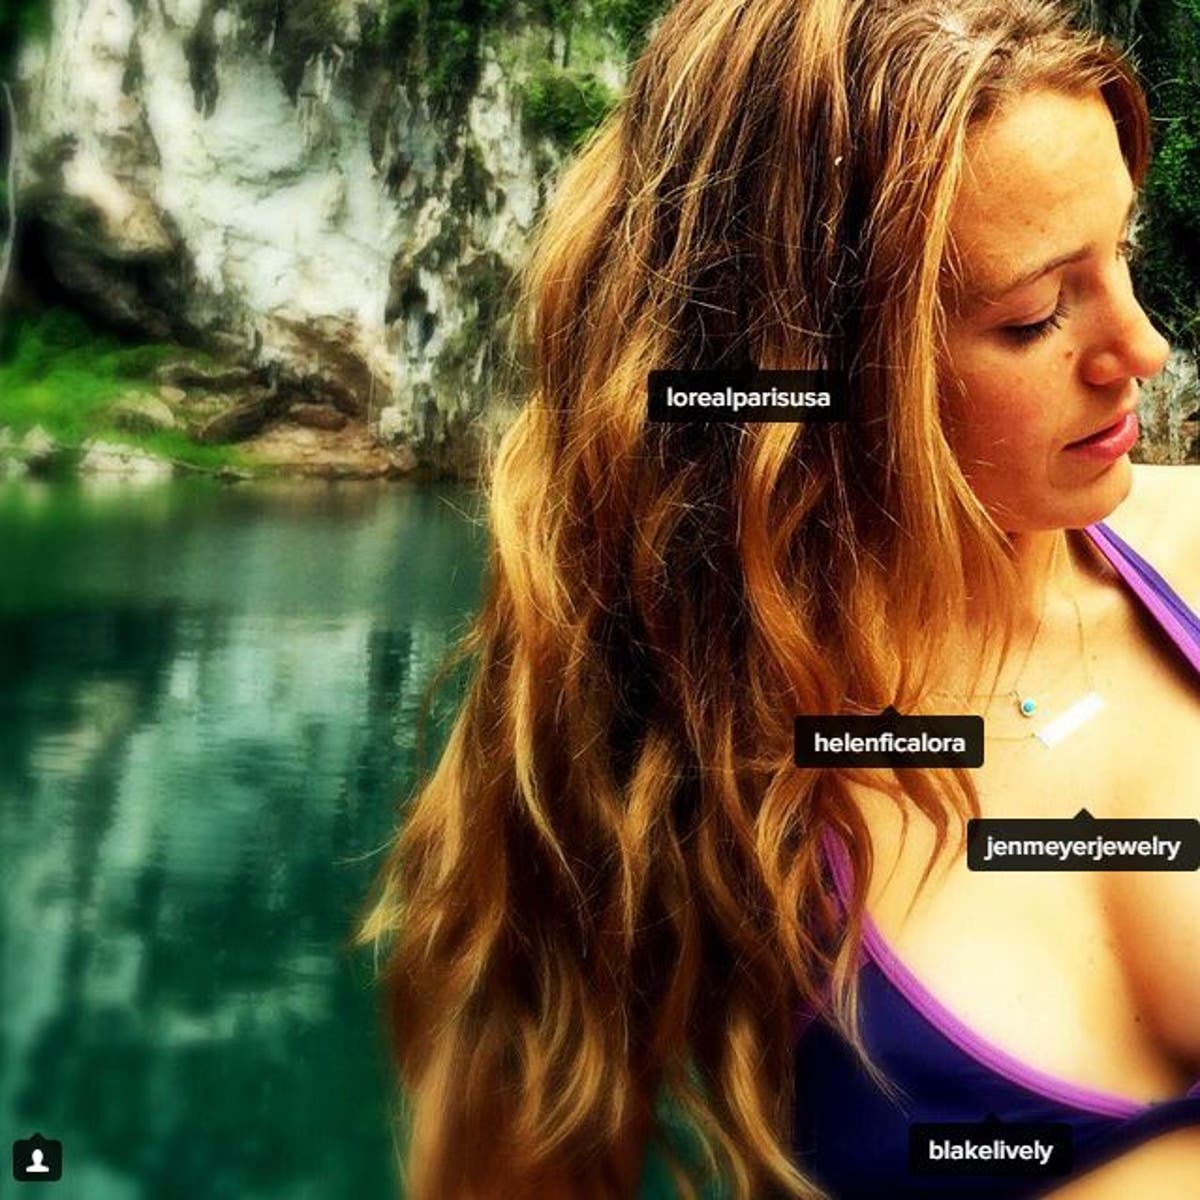 Blake Lively breastfeeding her baby is brought to you by Loreal Paris, The  Independent